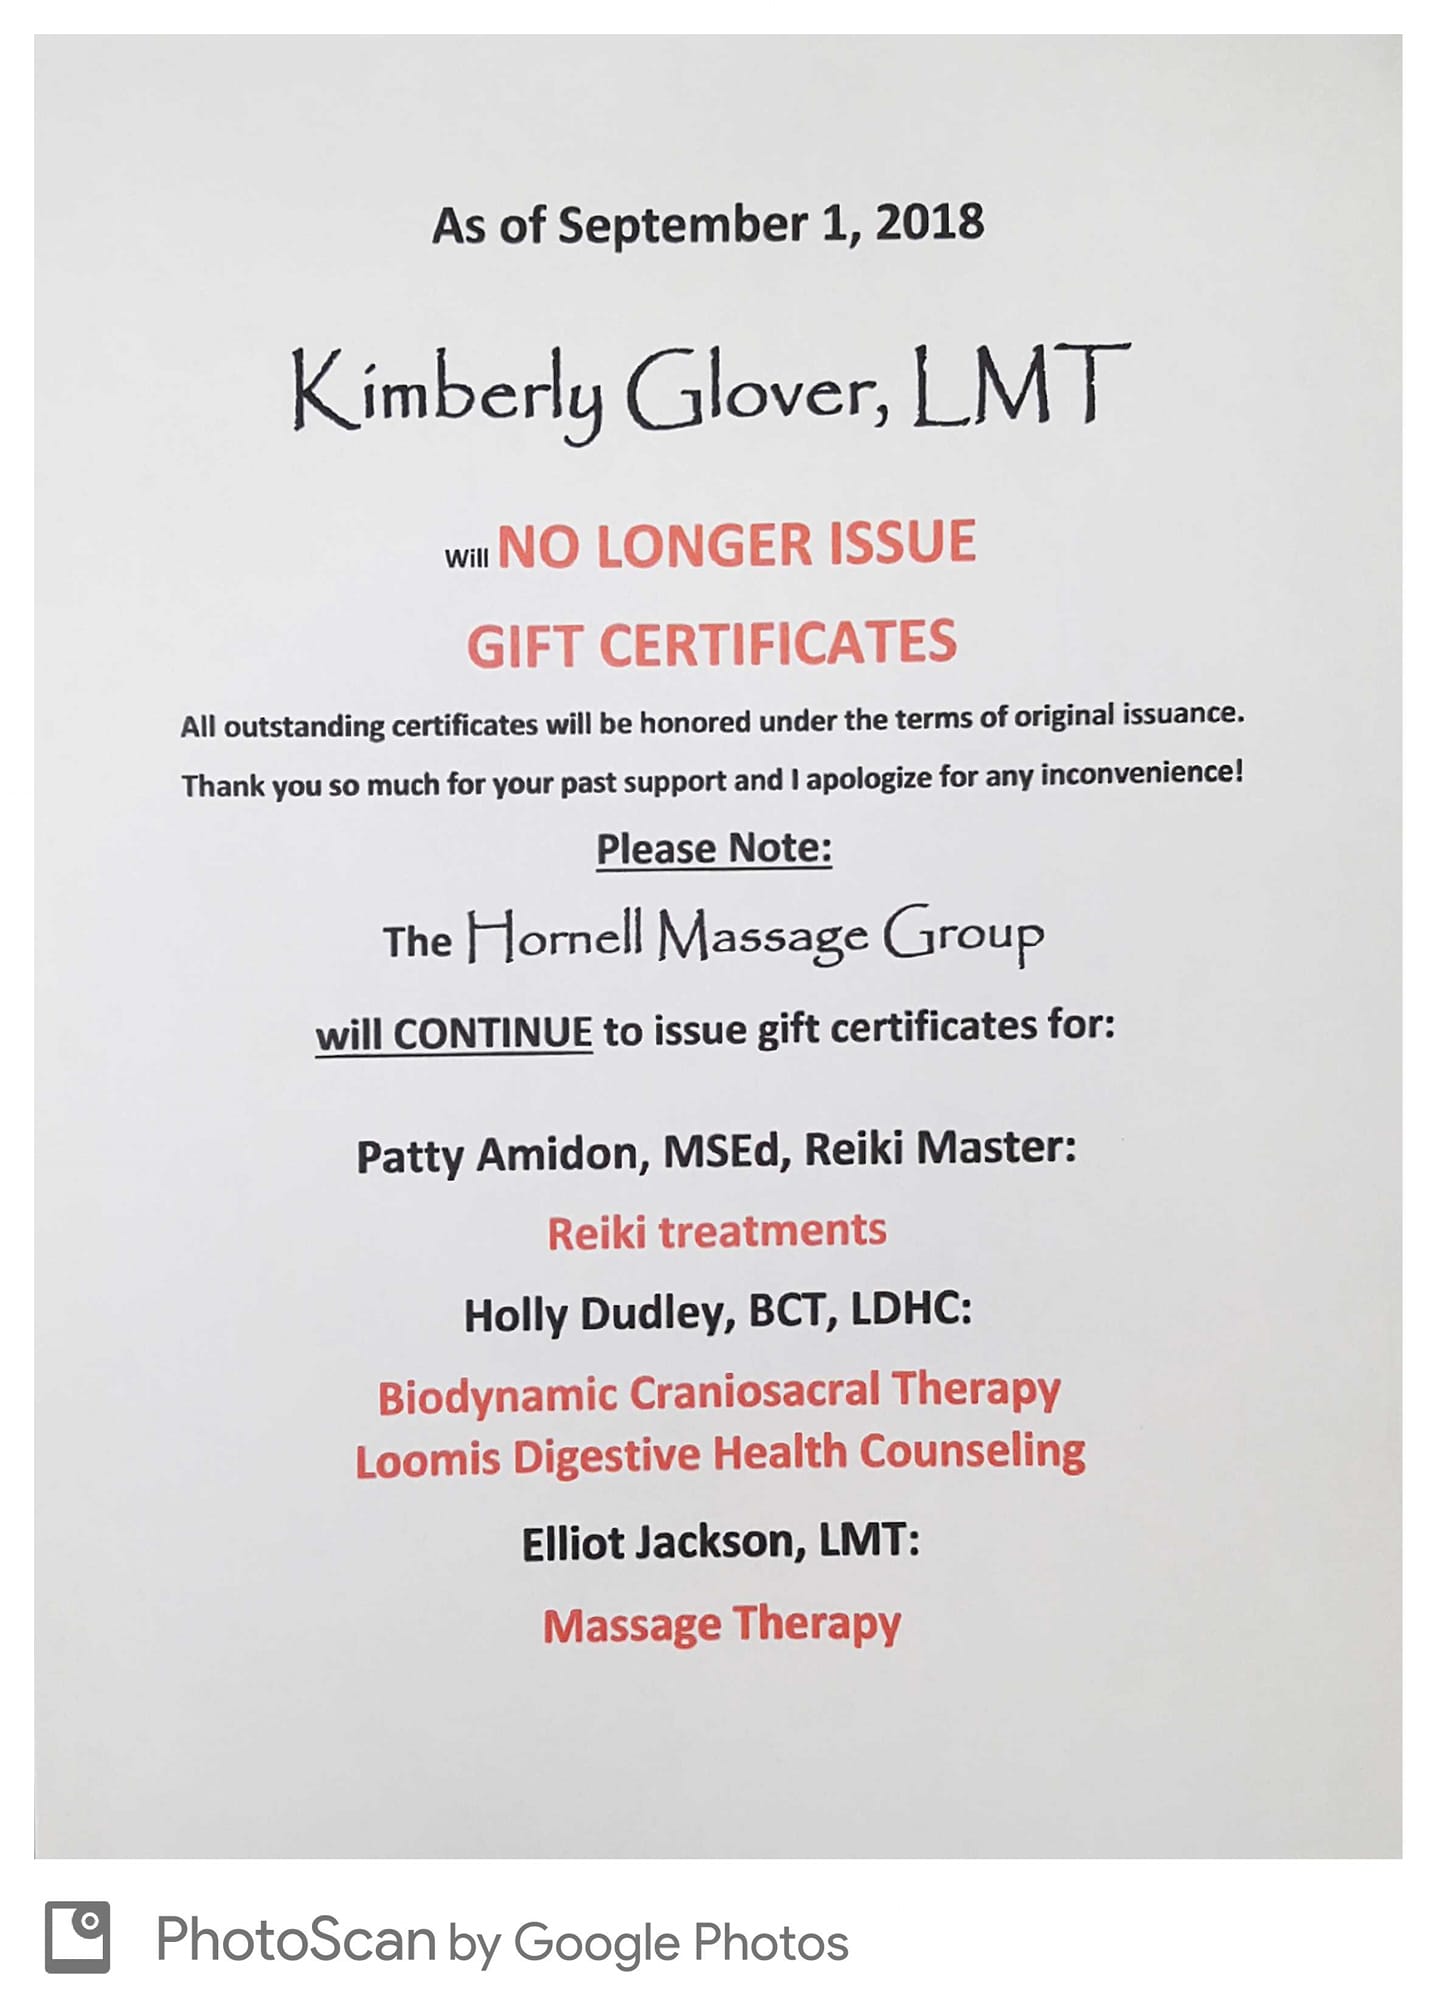 Kimberly Glover, L.M.T.